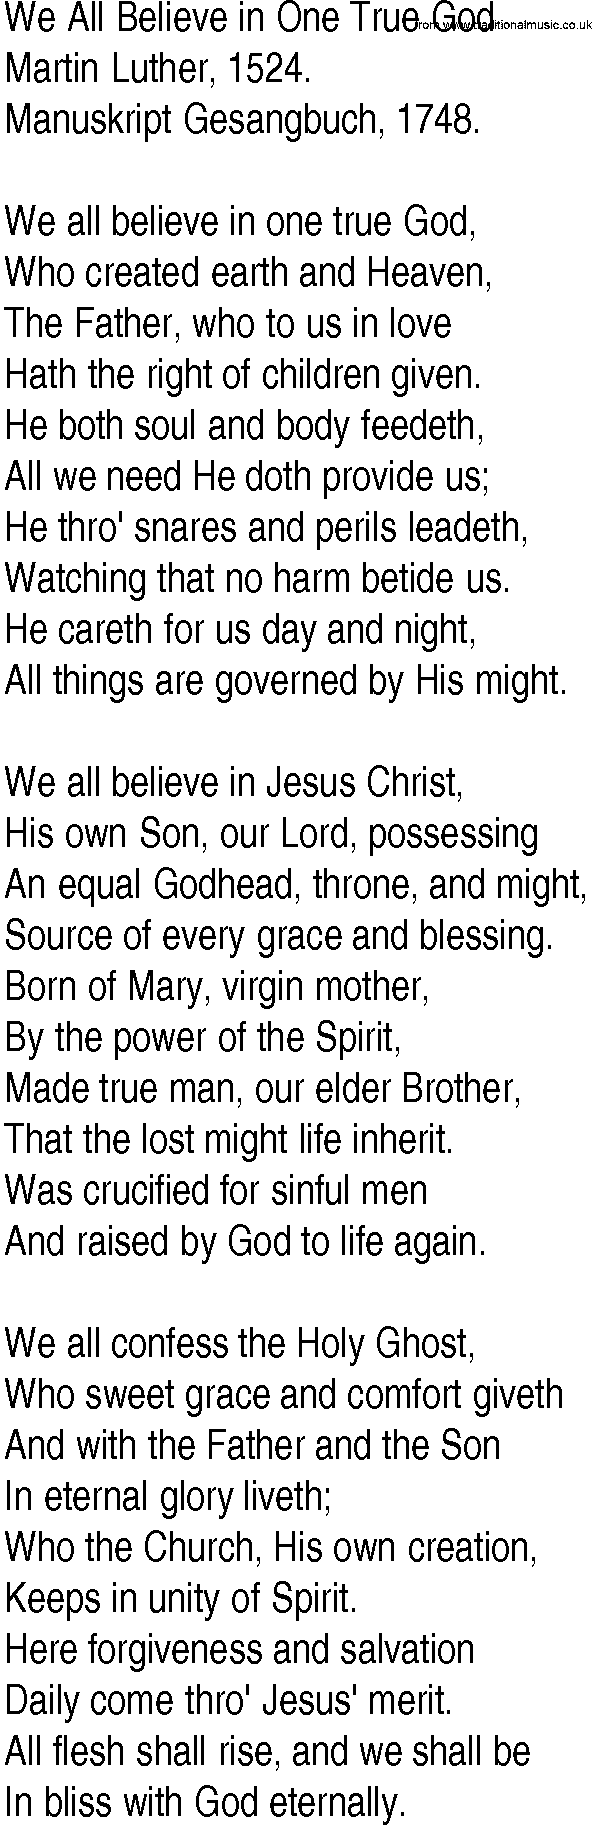 Hymn and Gospel Song: We All Believe in One True God by Martin Luther lyrics